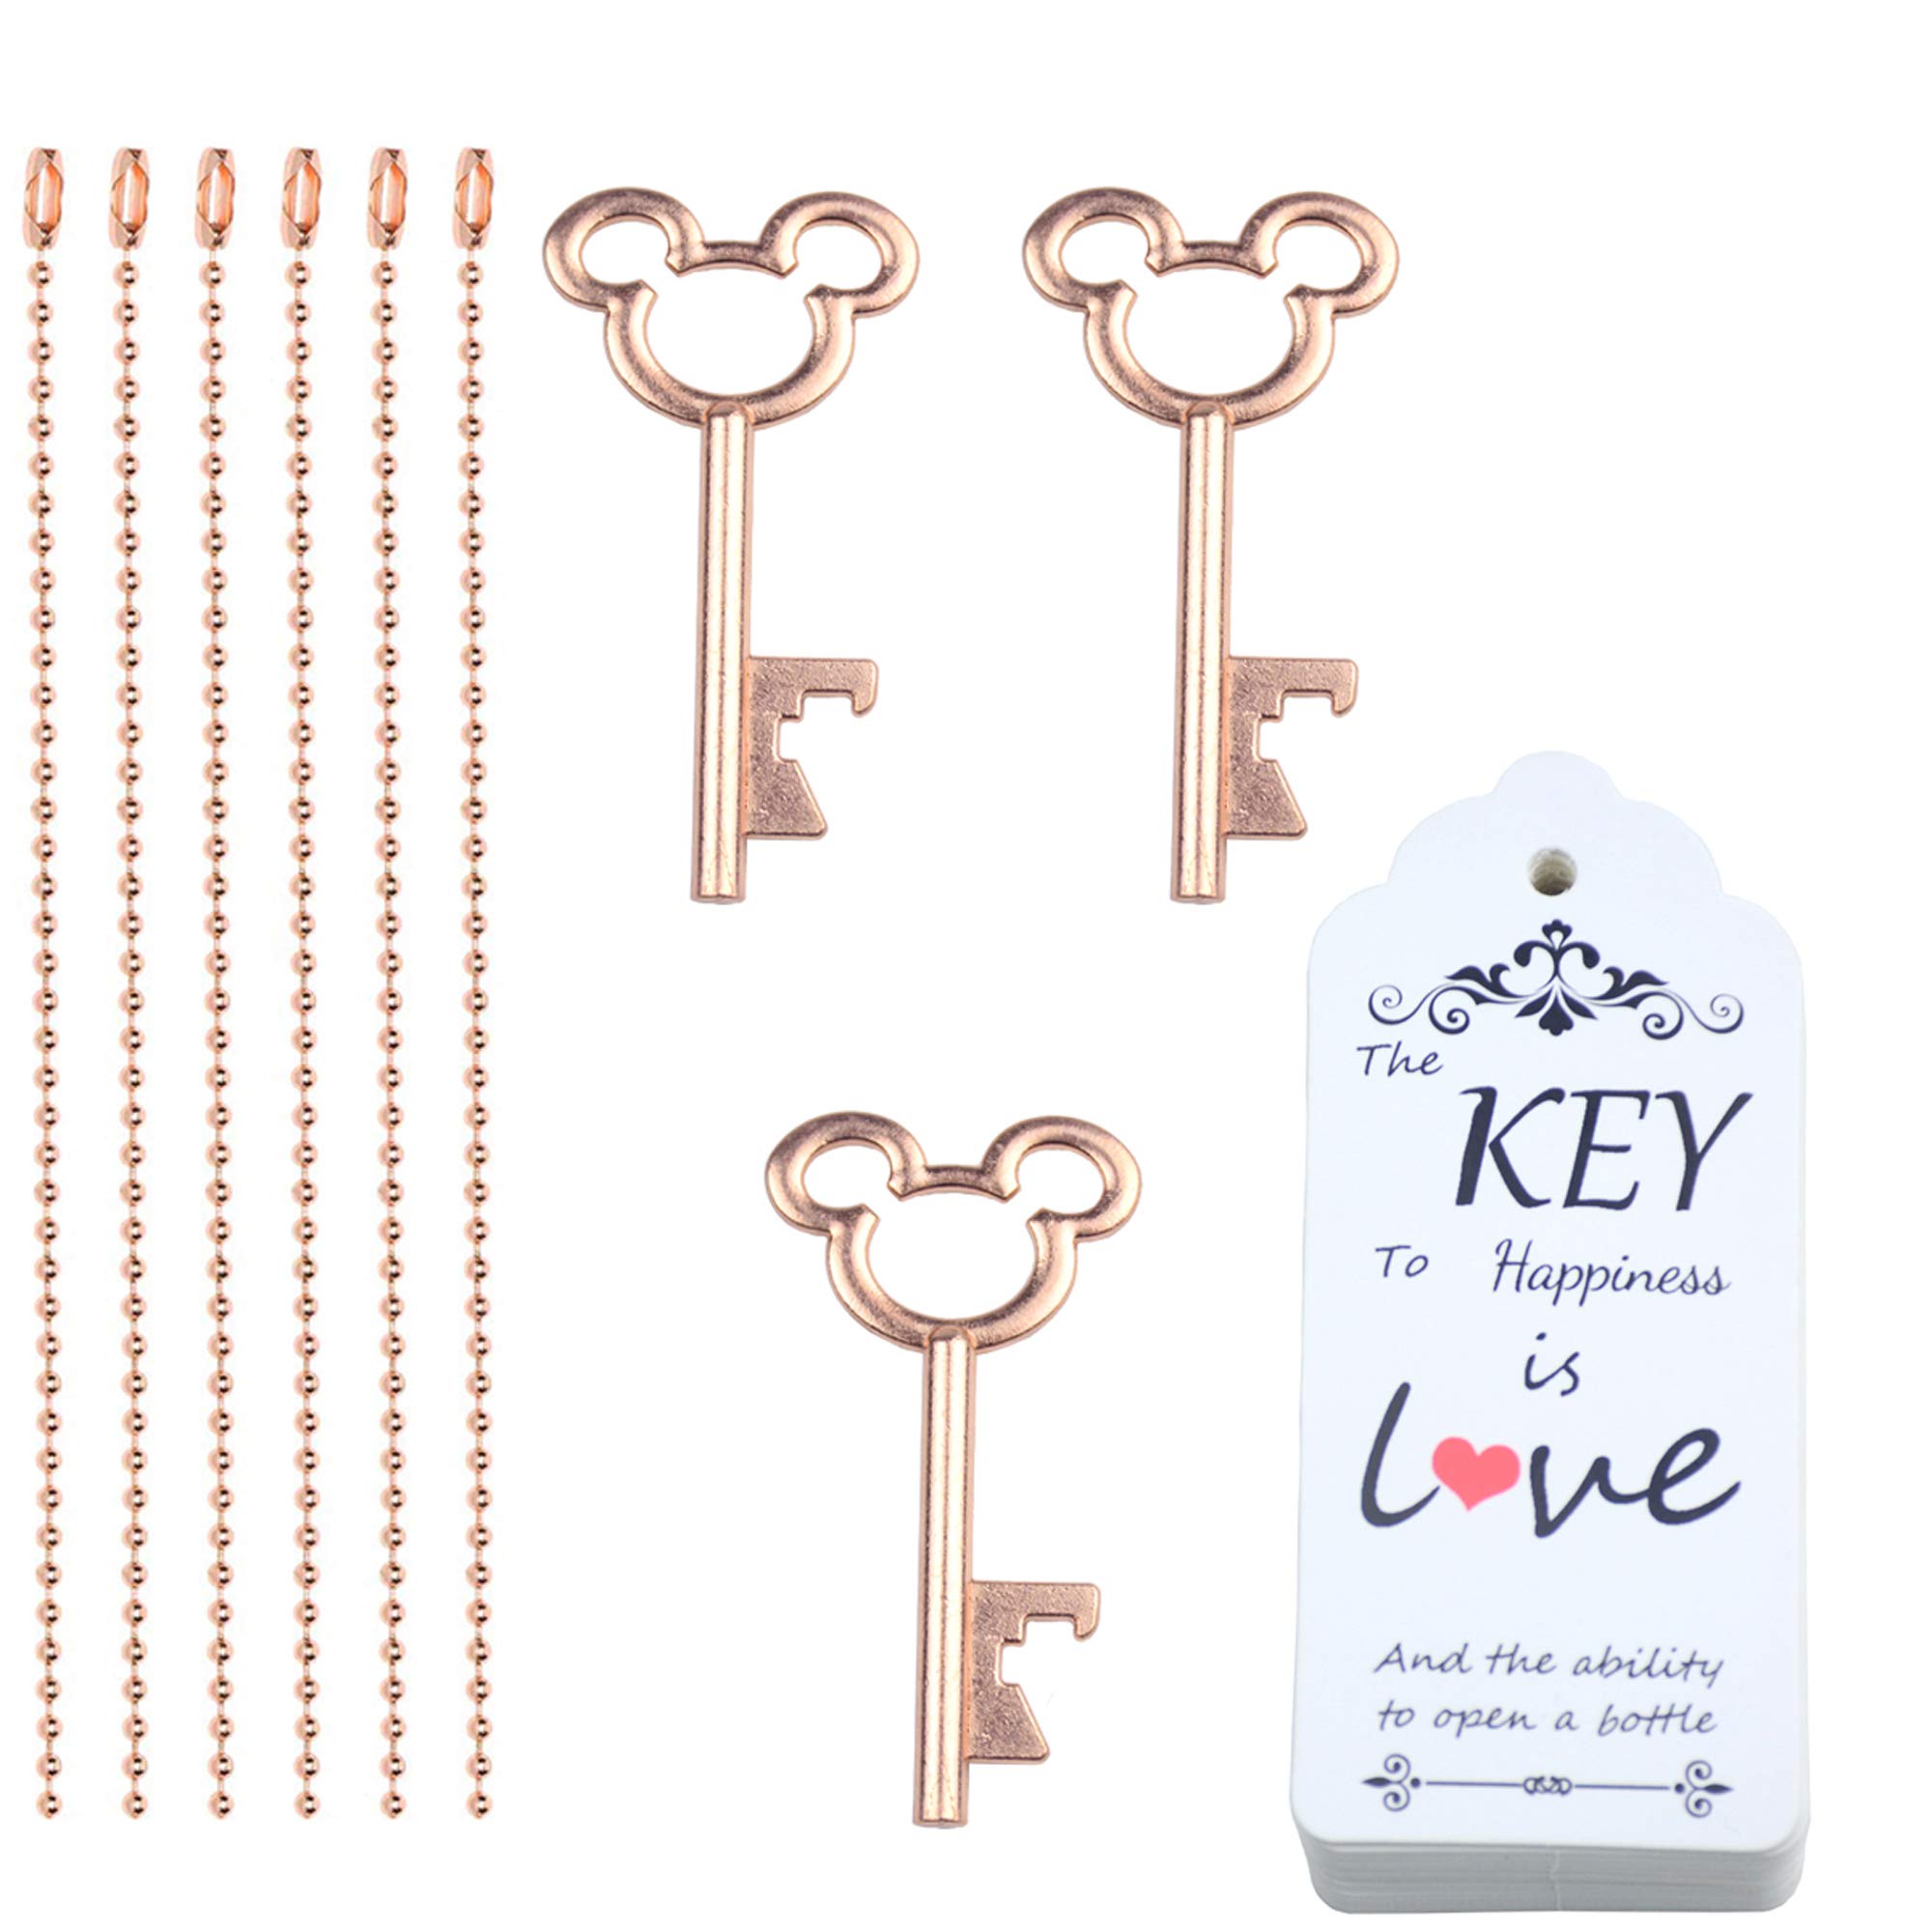 Aokbean 52pcs Vintage Skeleton Key Bottle Opener with Escort Thank You Tag Card and Keychain for Party Wedding Favor Guest Souvenir Kit (Rose Gold)